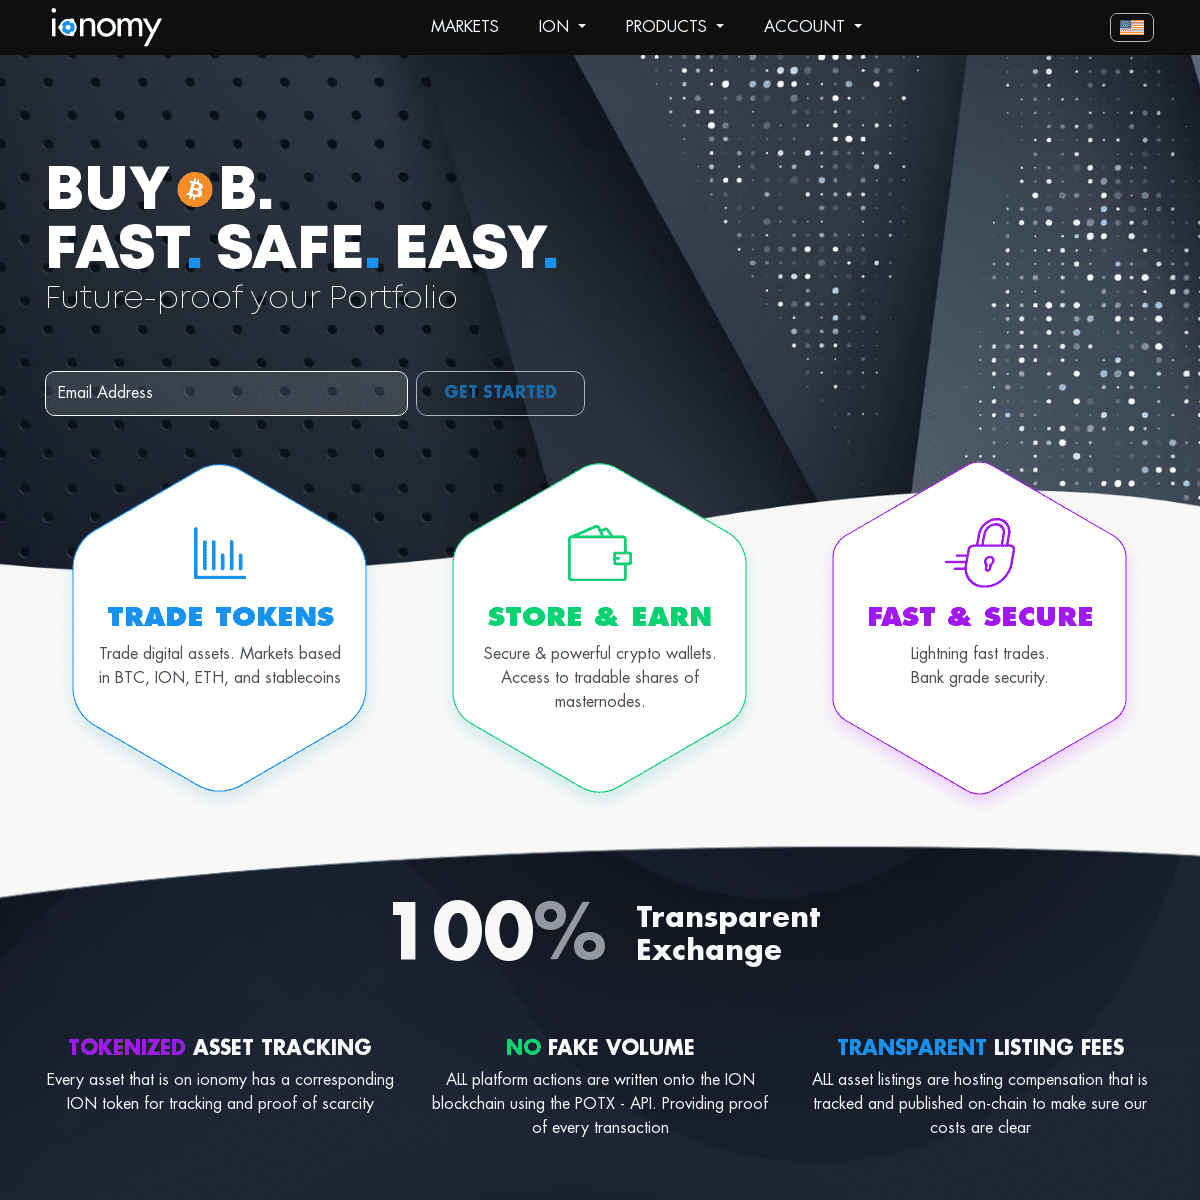 A complete backup of https://ionomy.com